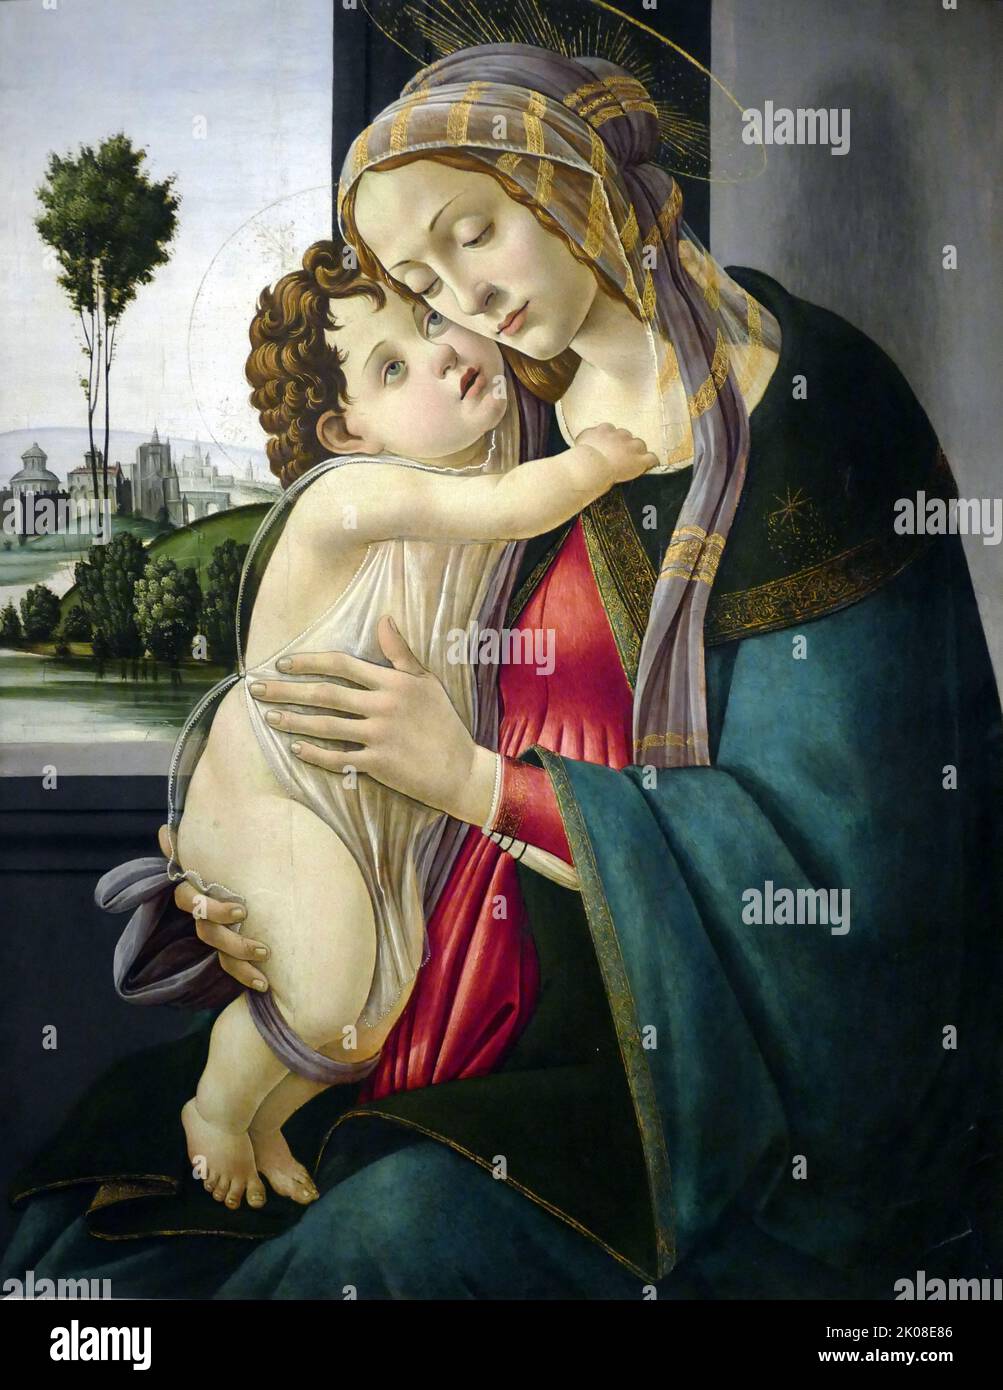 The Virgin and Child, c1475-1500, from the workshop of Alessandro di Mariano di Vanni Filipepi (c. 1445 - May 17, 1510), known as Sandro Botticelli, was an Italian painter of the Early Renaissance Stock Photo